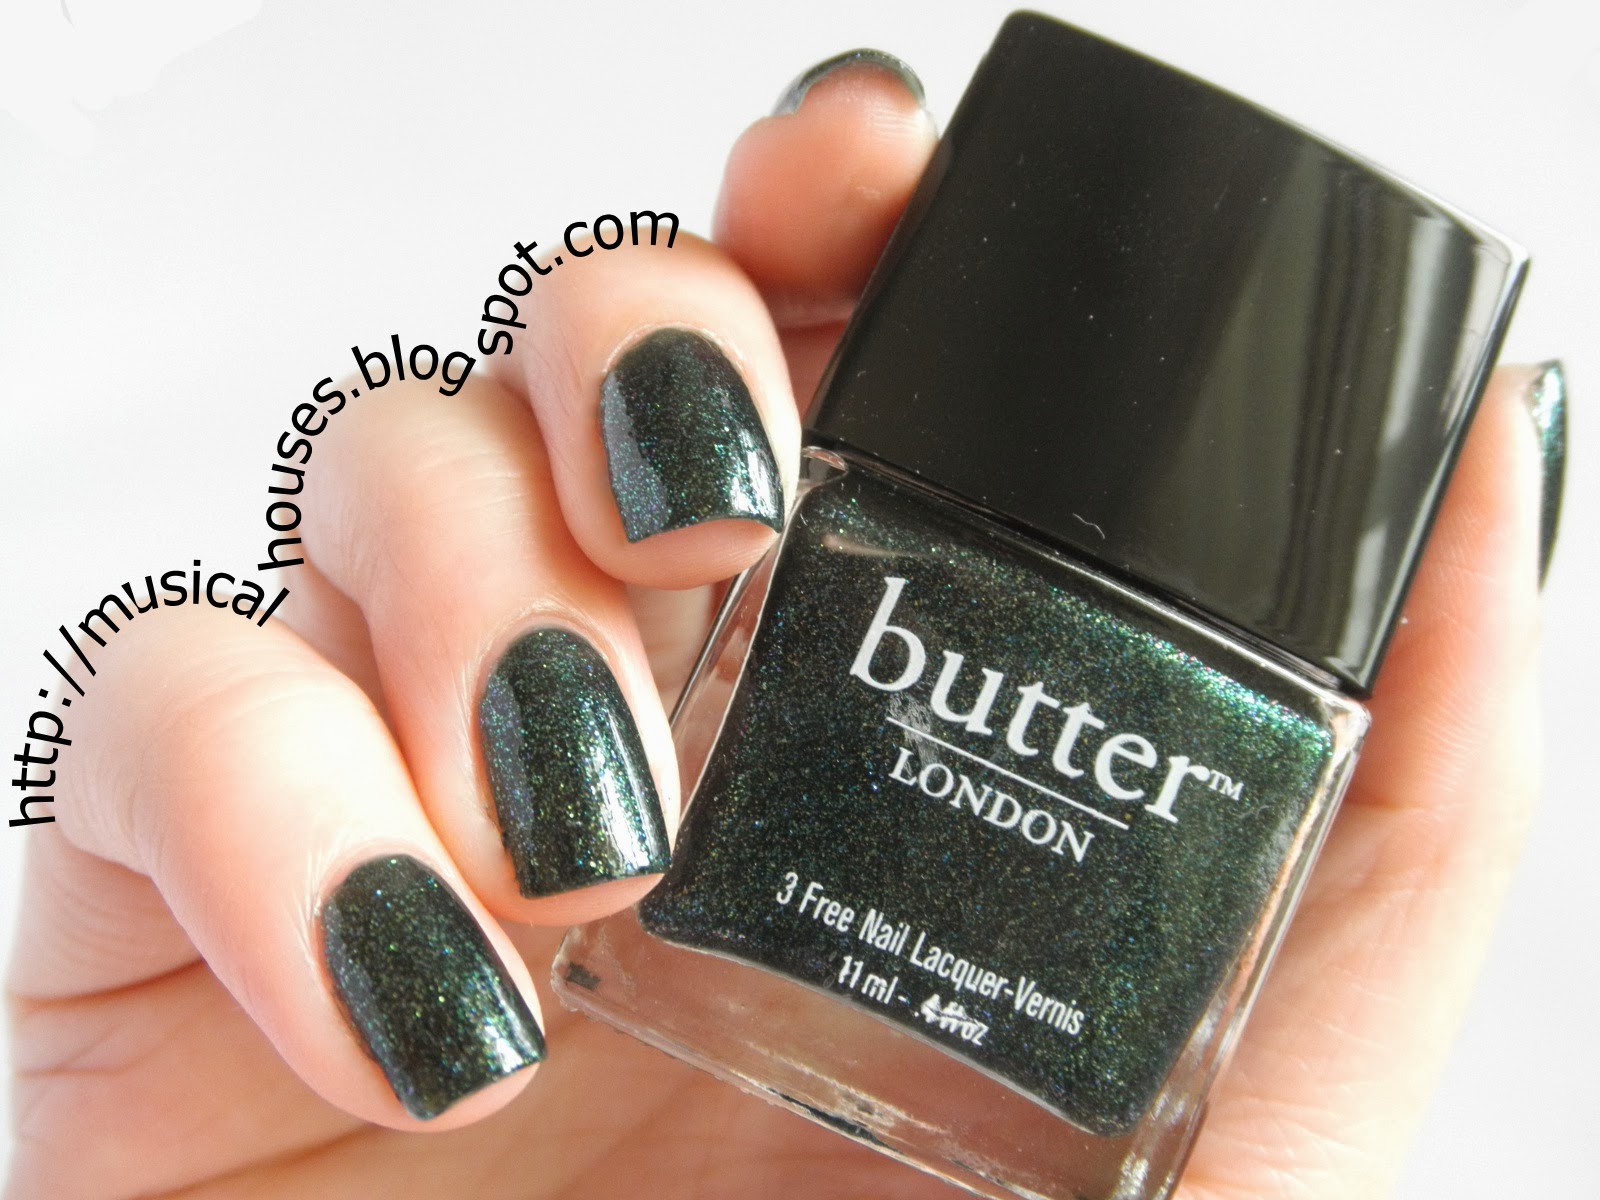 4. Butter London Patent Shine 10X Nail Lacquer in "Candy Floss" - wide 7